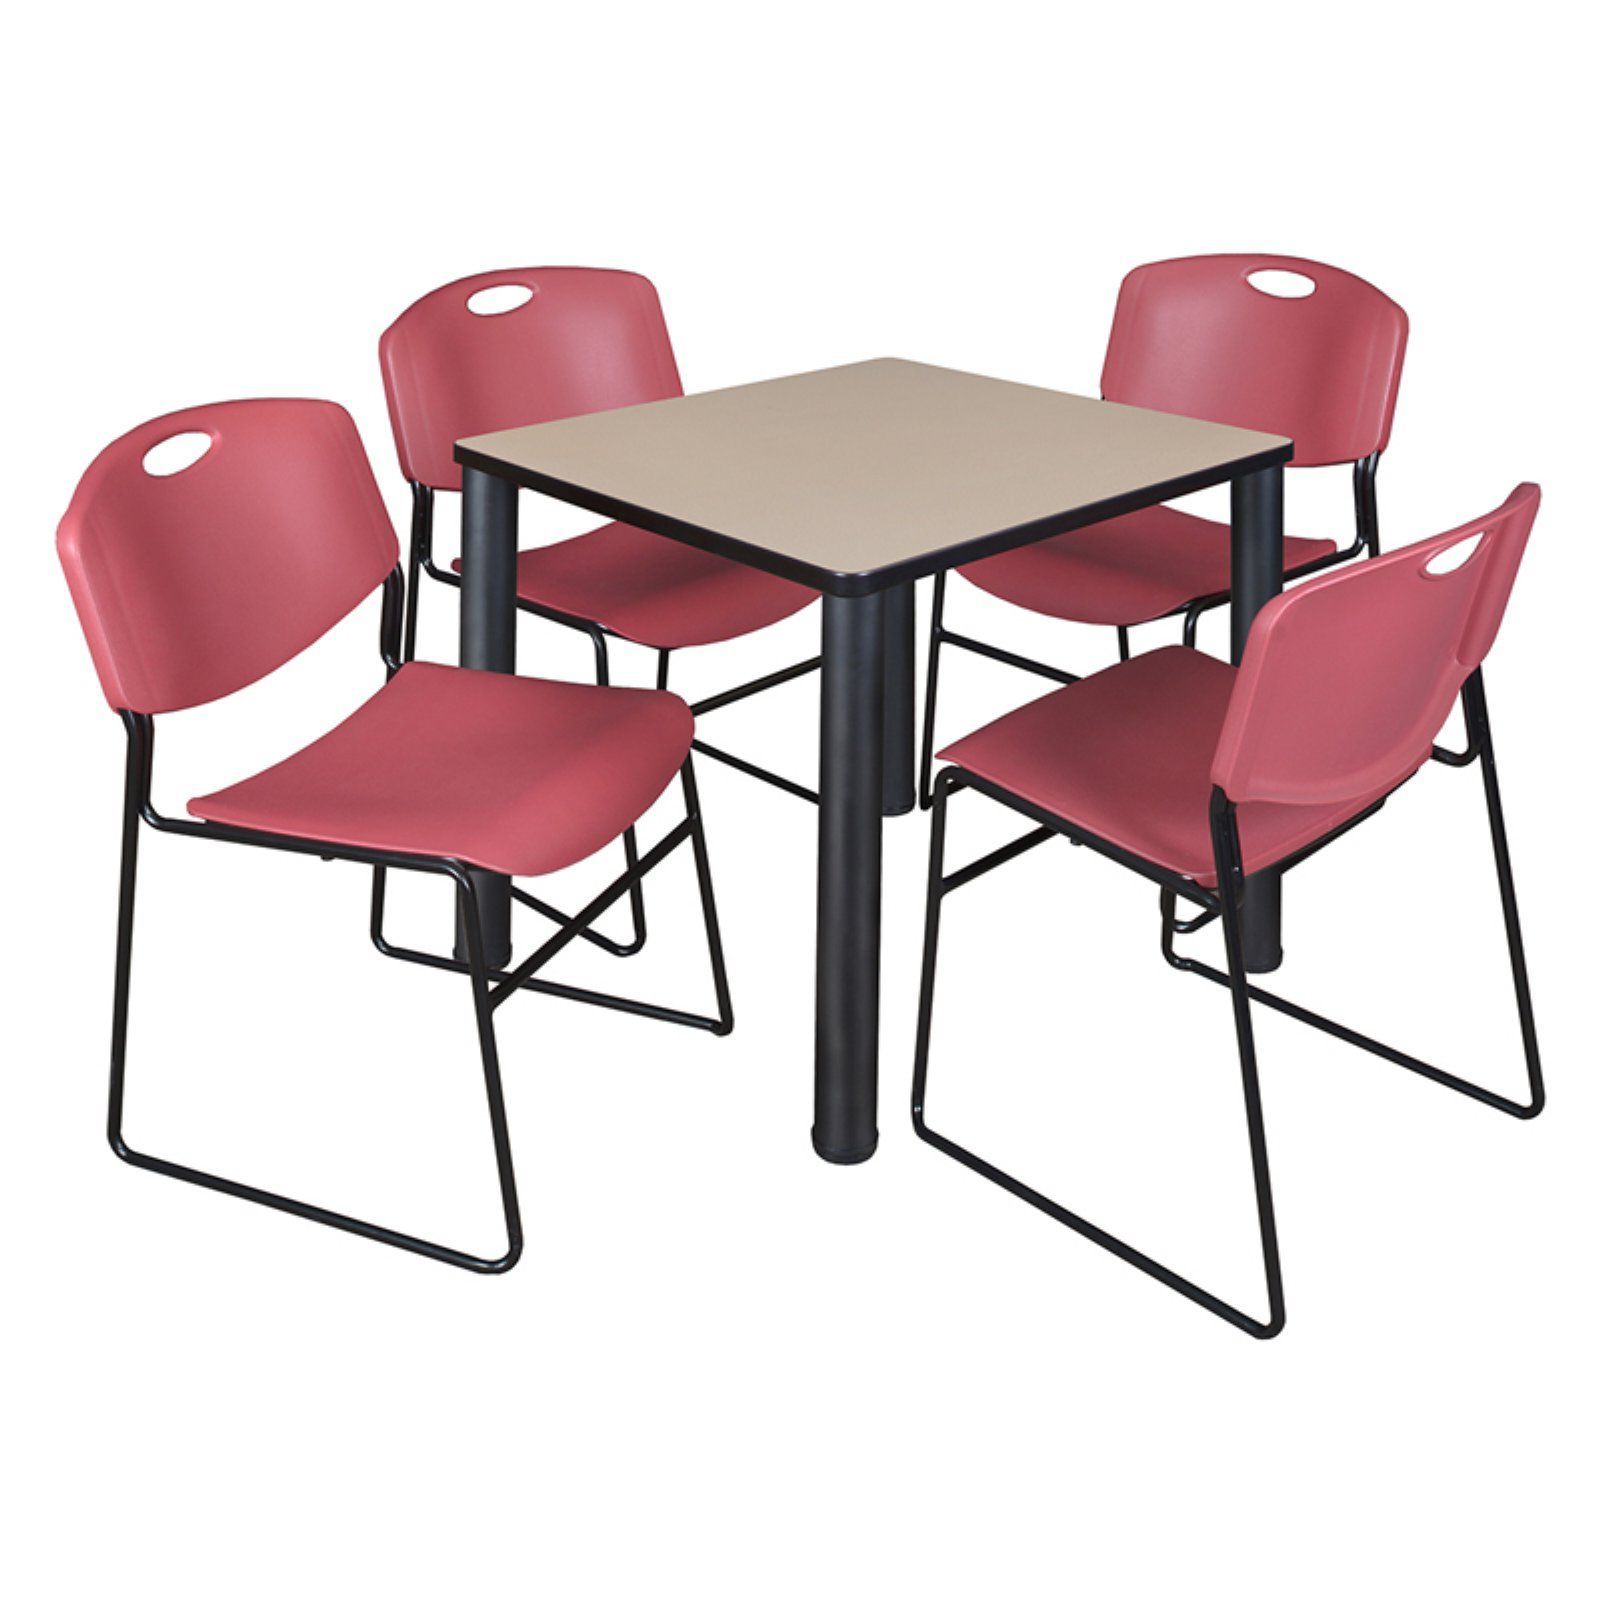 Current Mode Square Breakroom Tables Regarding Regency Kee Square Beige Breakroom Table With 4 Stackable (View 15 of 20)